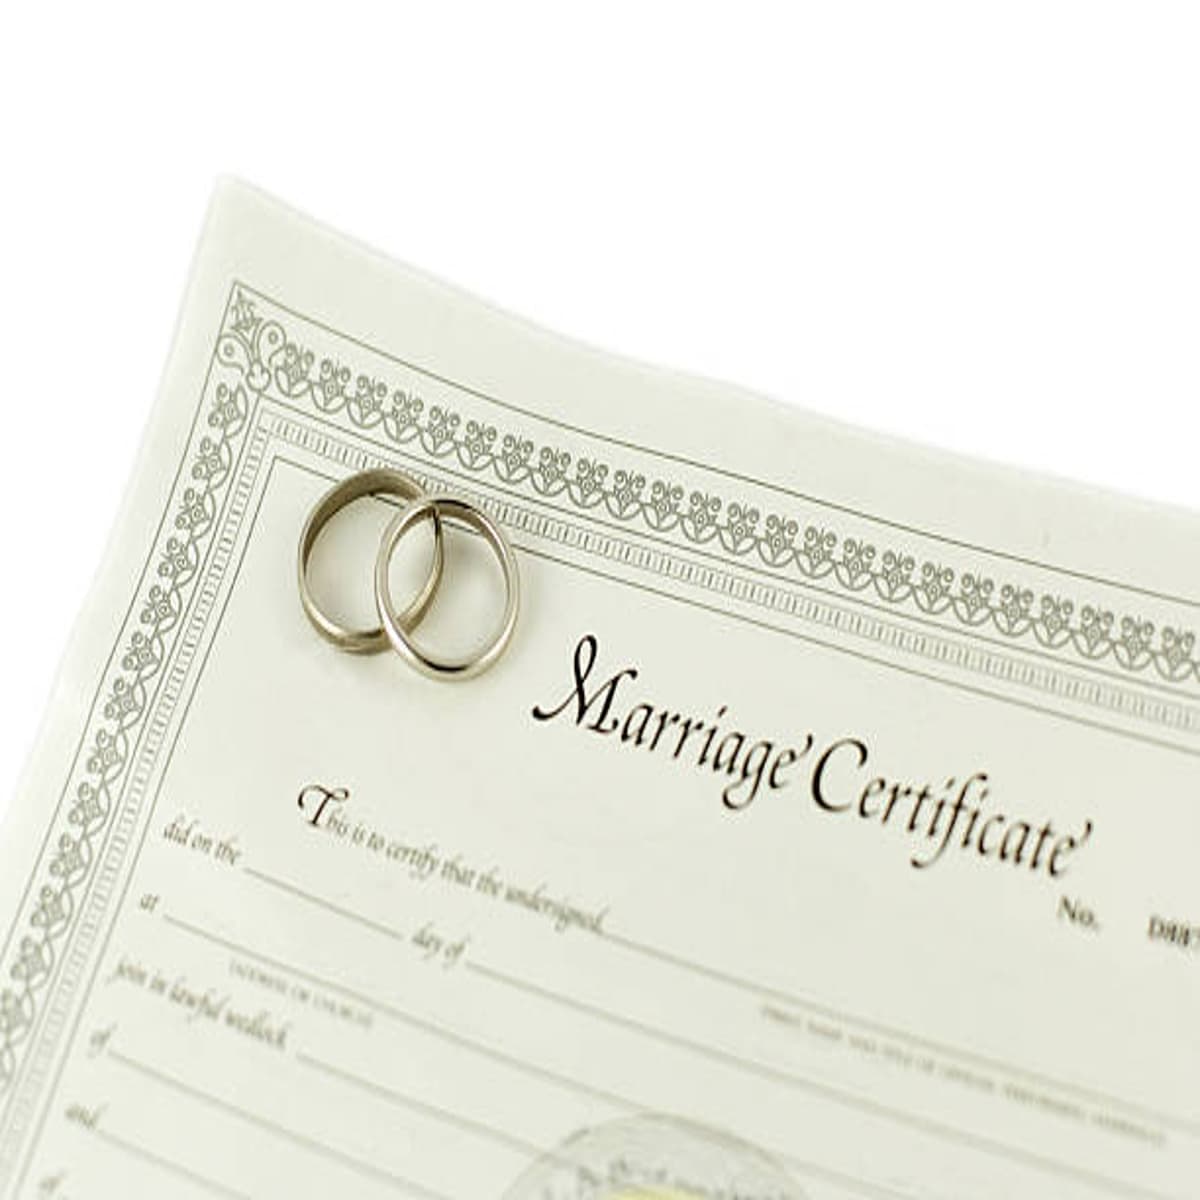 How to Get a Marriage Certificate in Kenya